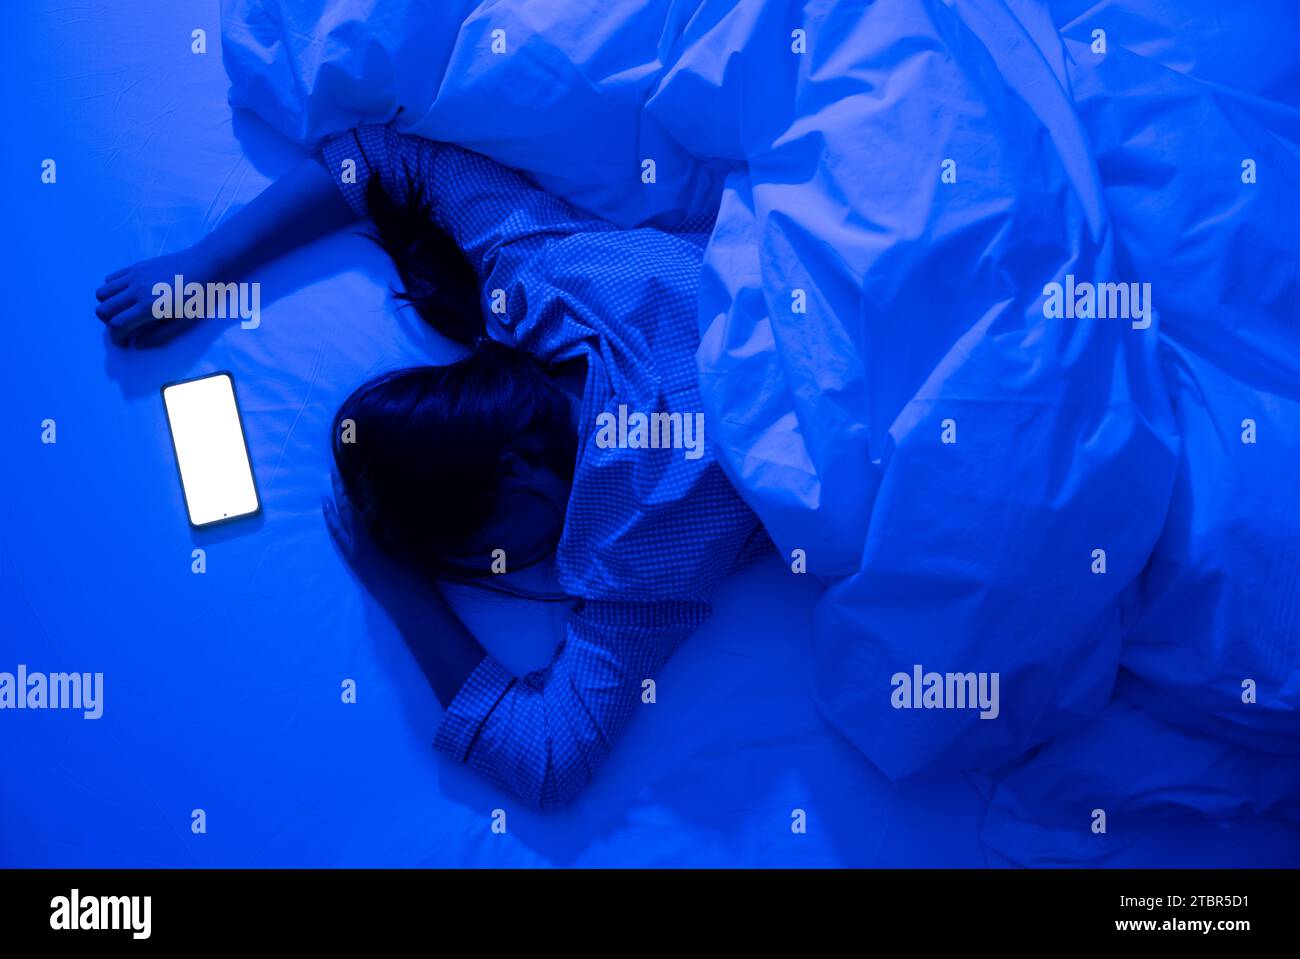 Woman using smartphone lying on bed late at night in bedroom with blue moonlight Stock Photo